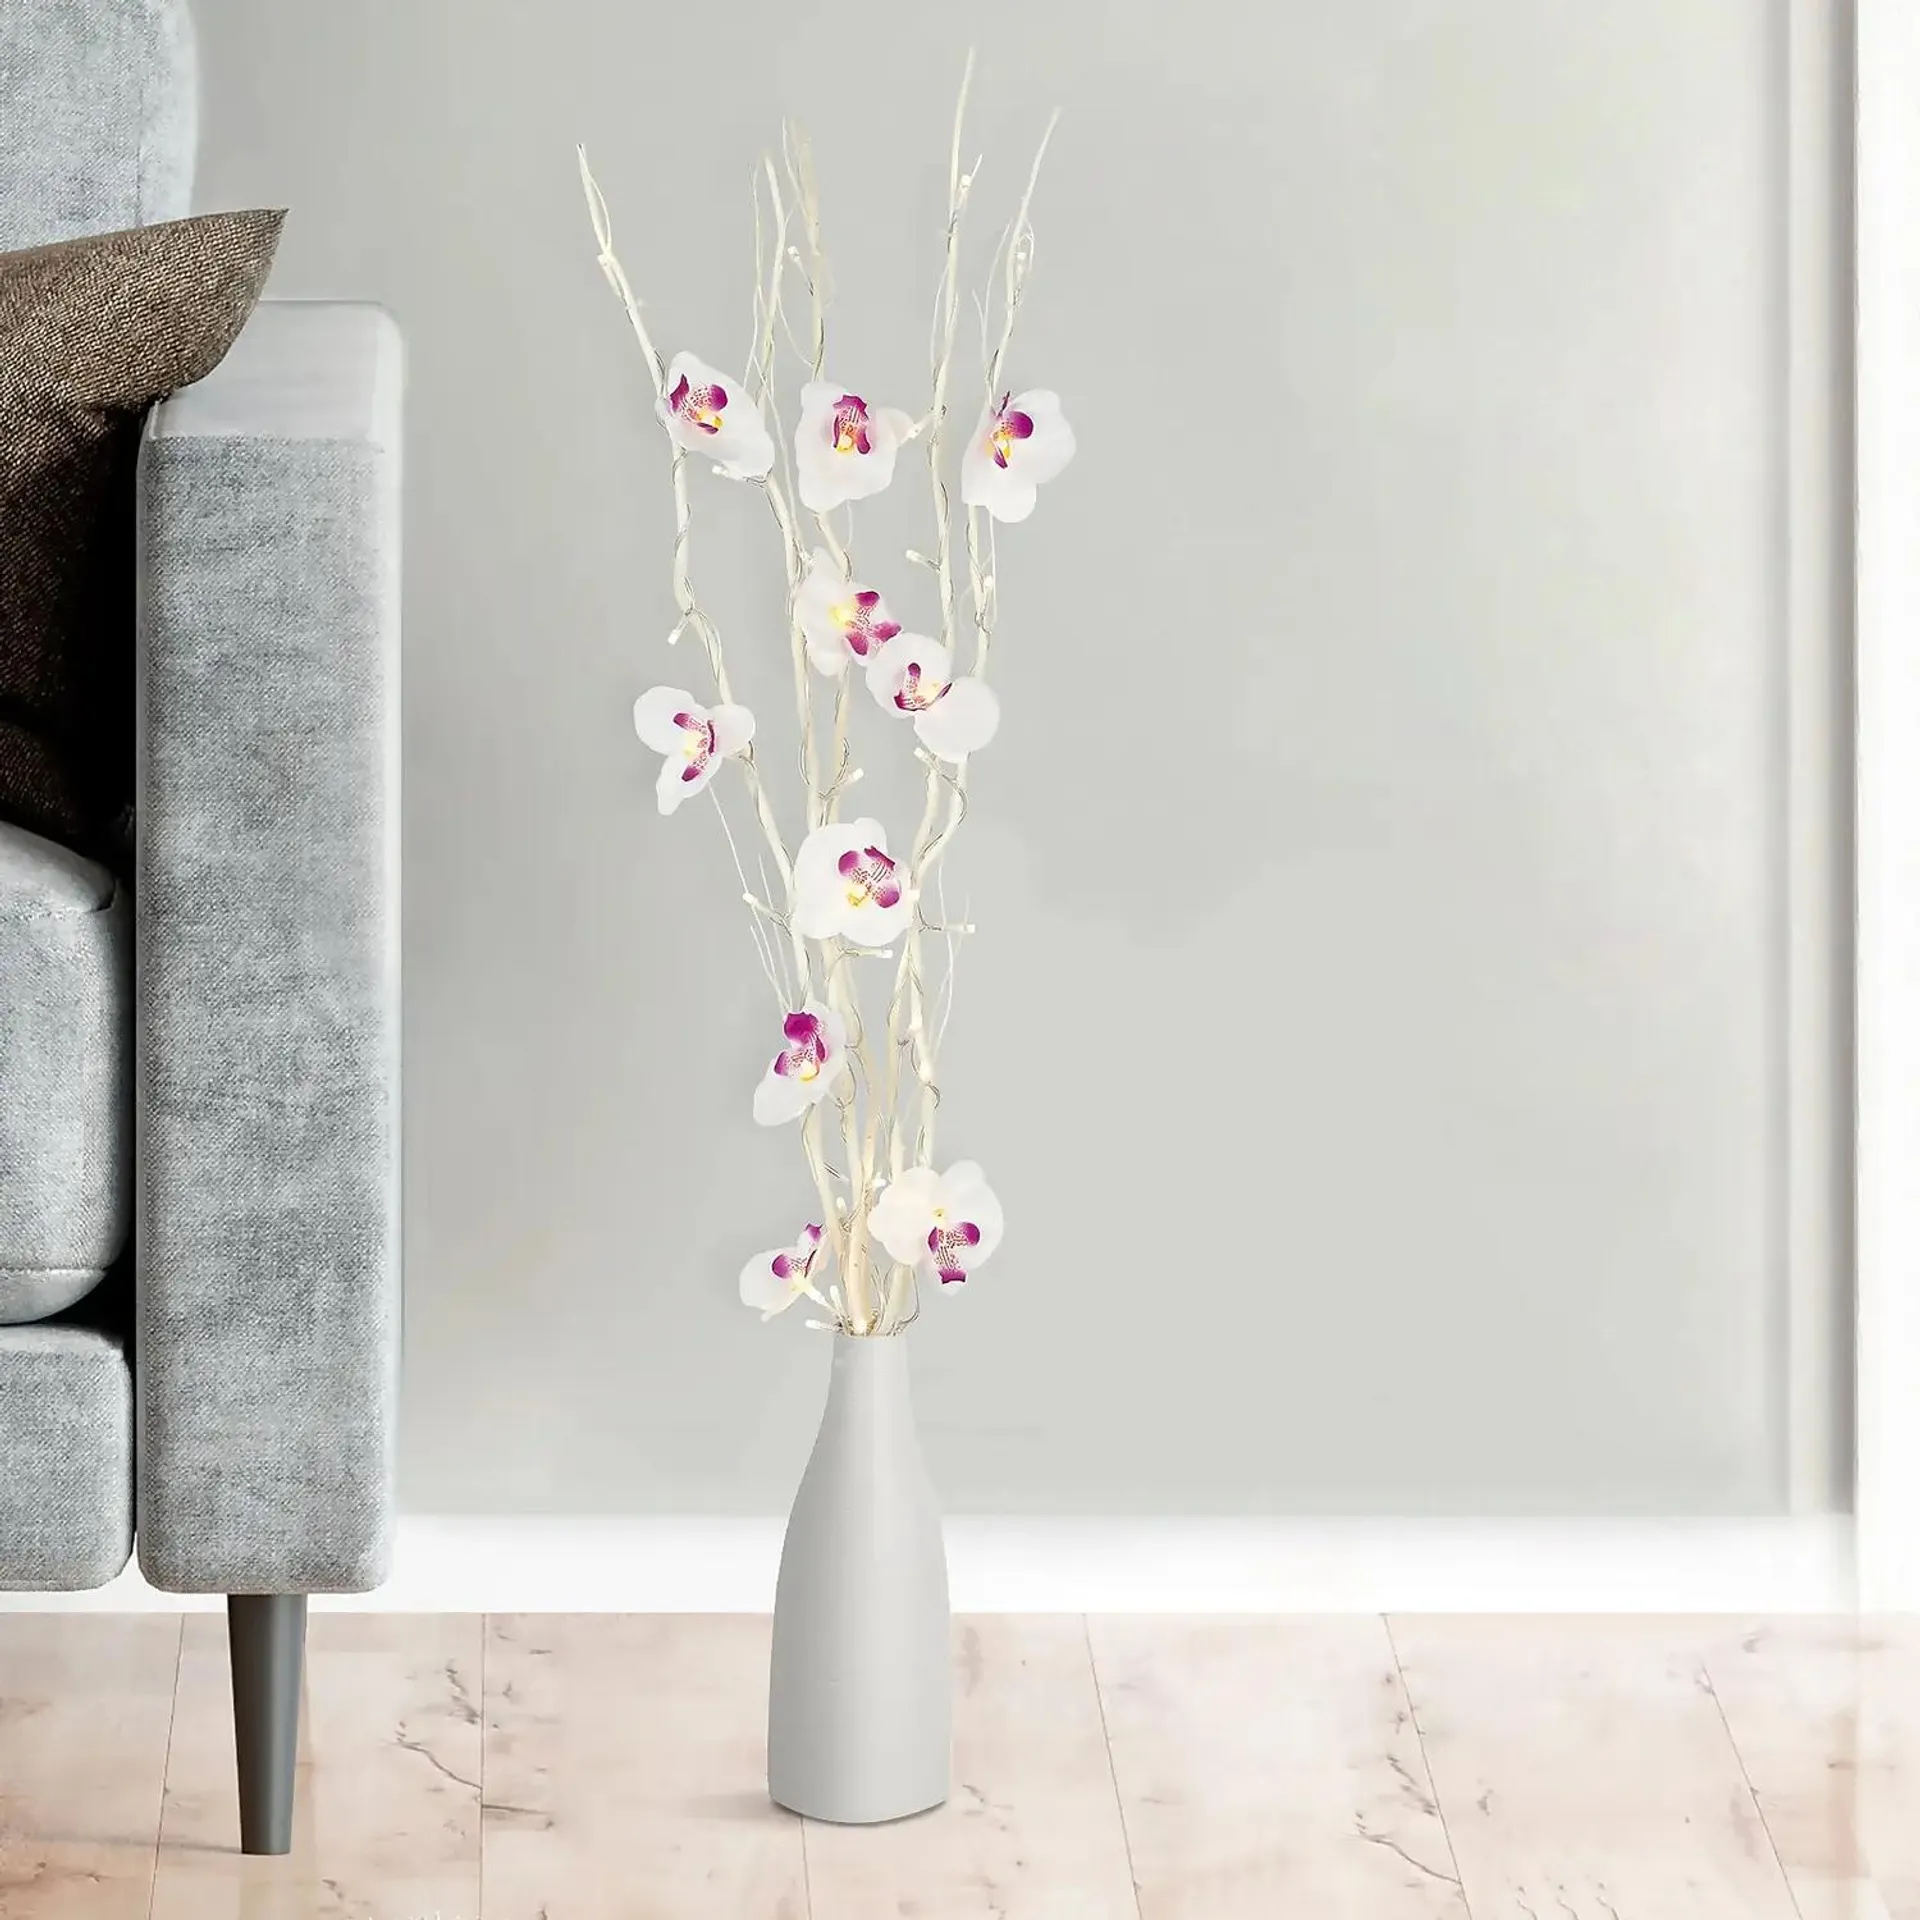 100cm White Orchid Battery Twig Lights